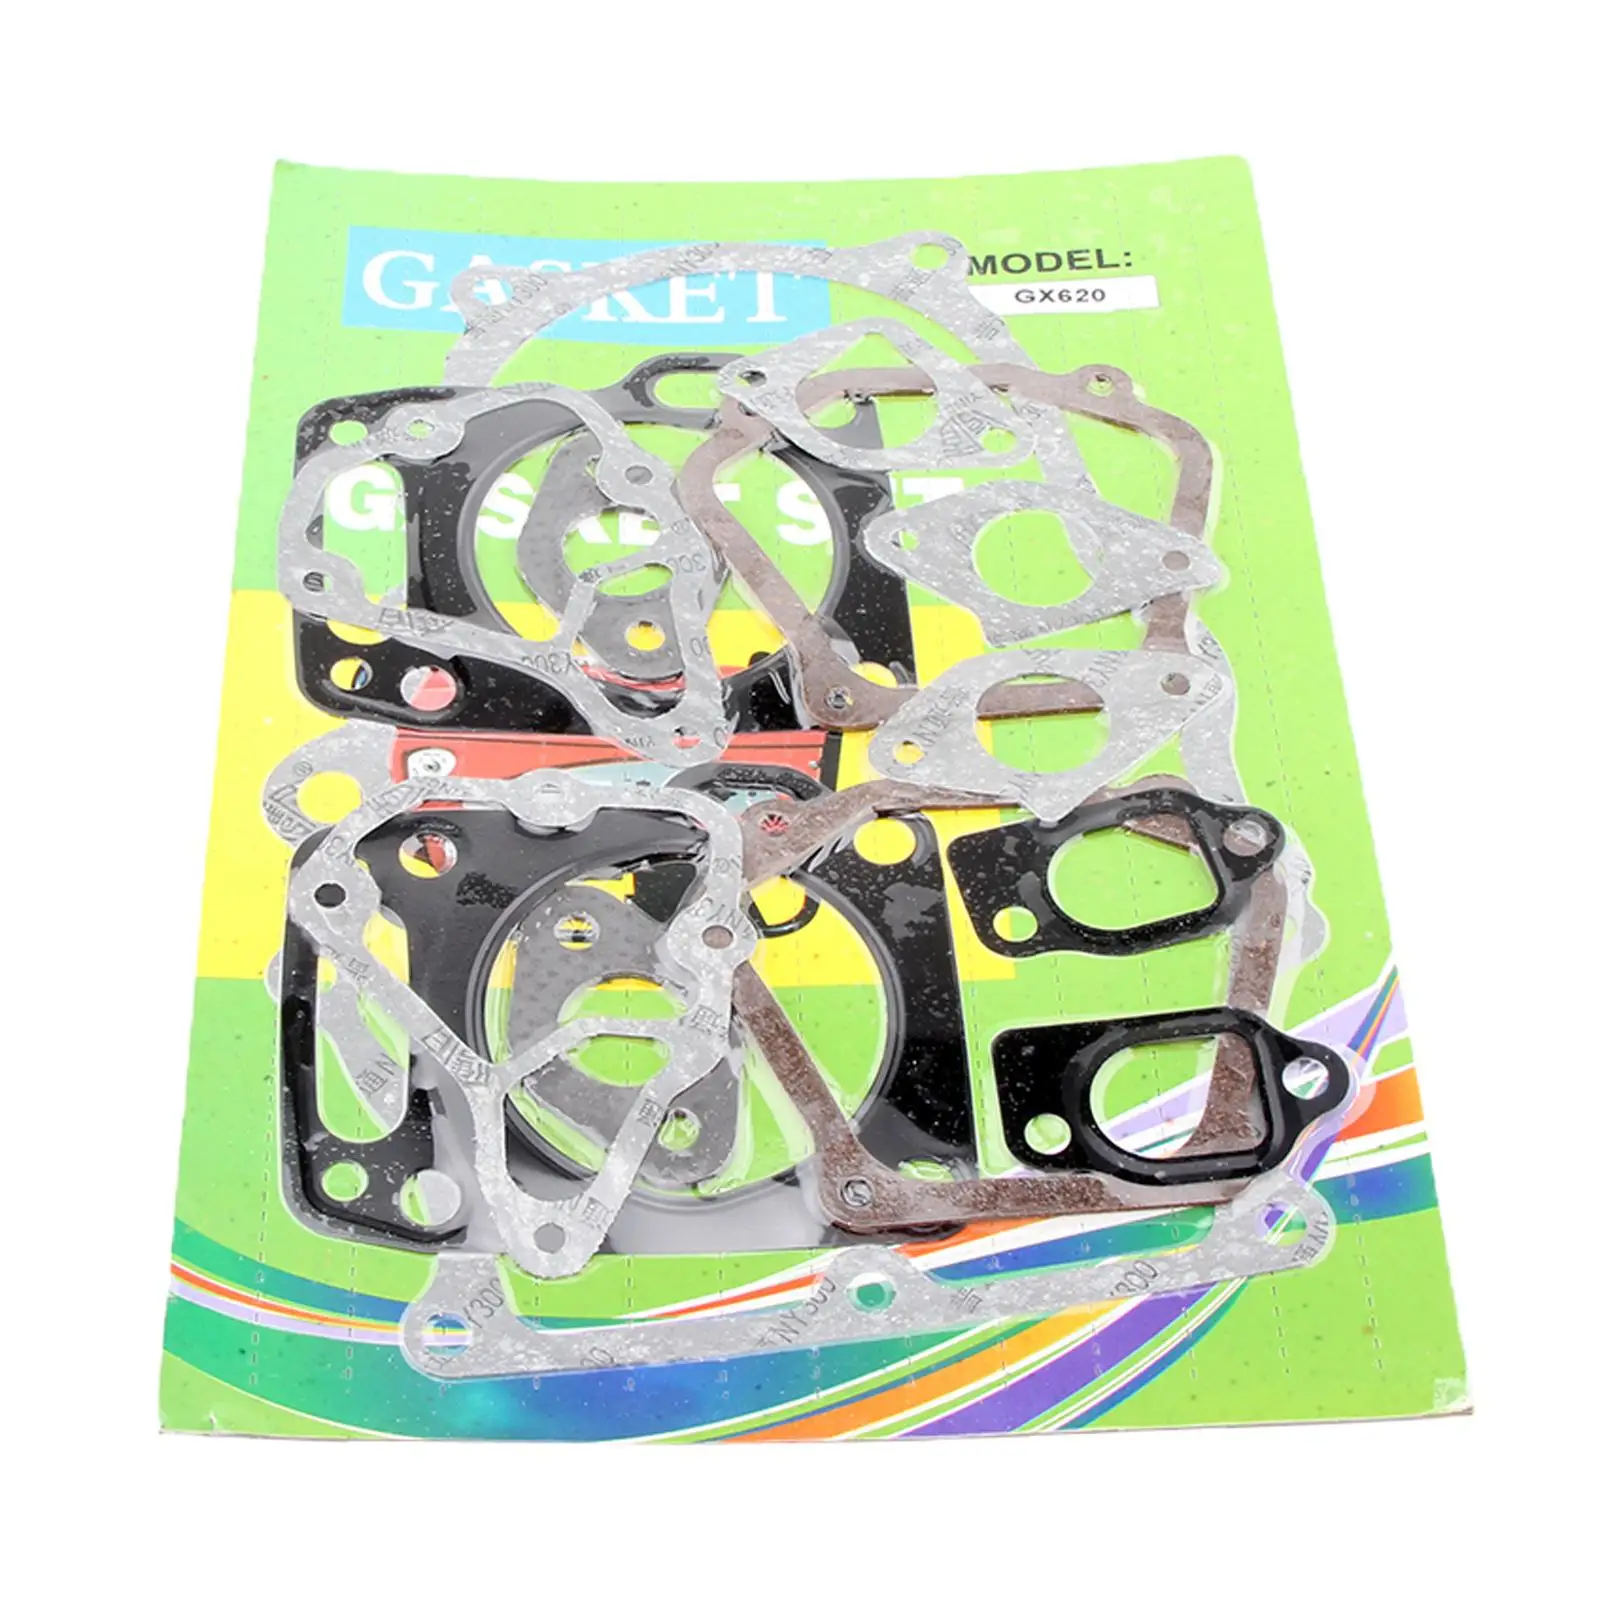 Gx620 Gaskets Set Fits  Gx620 Replaces Full Set of Gaskets Head Gasket